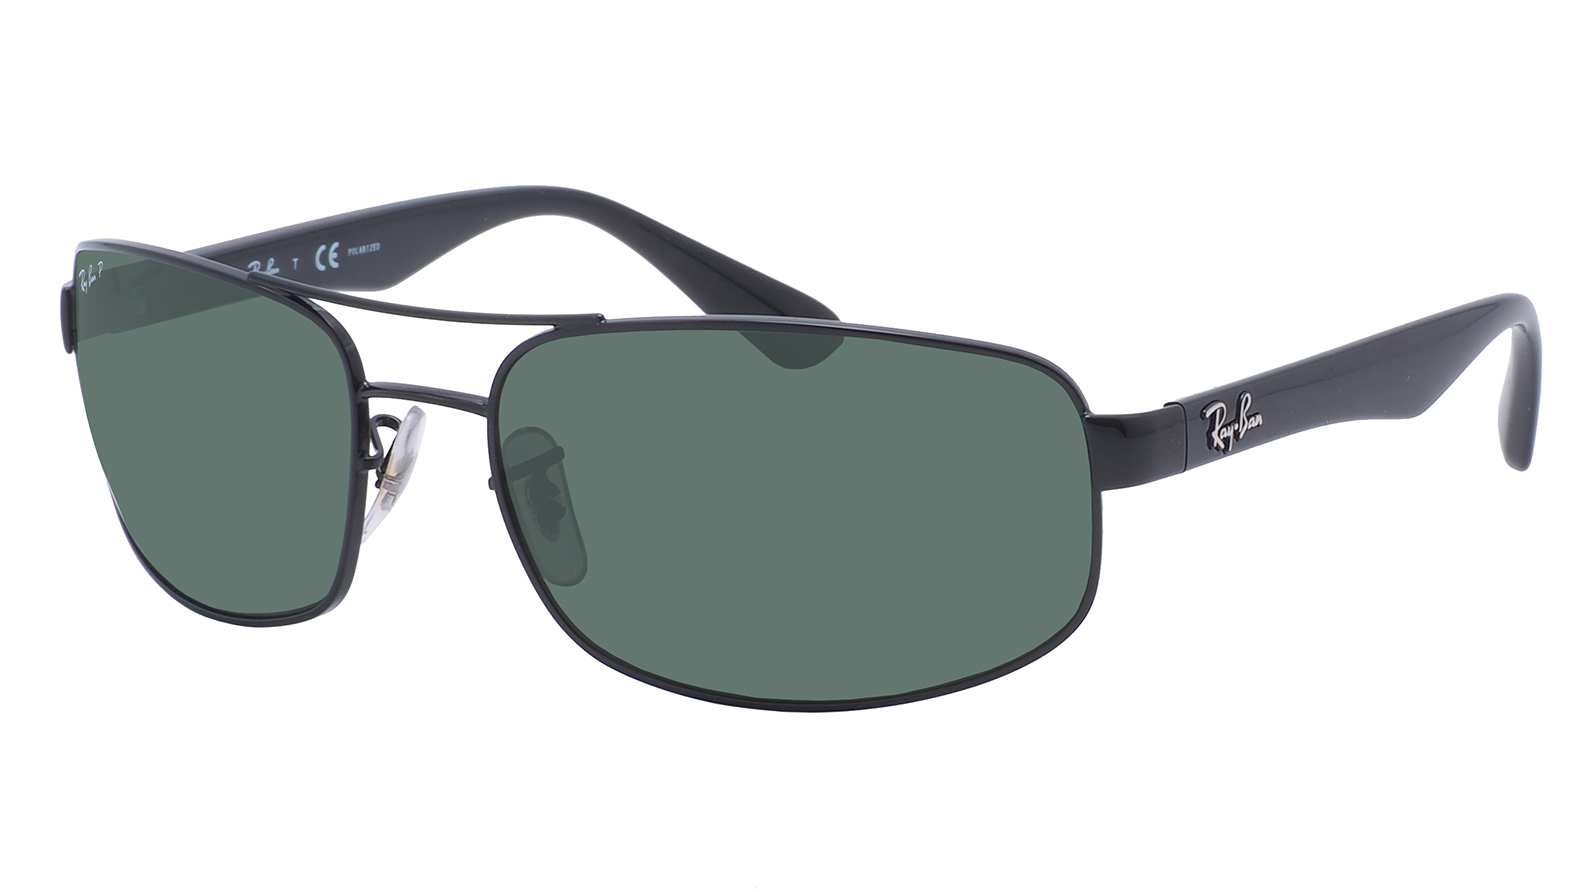 Ray-Ban Active Lifestyle RB 3445 002/58 ray ban active lifestyle rx 7017 5196